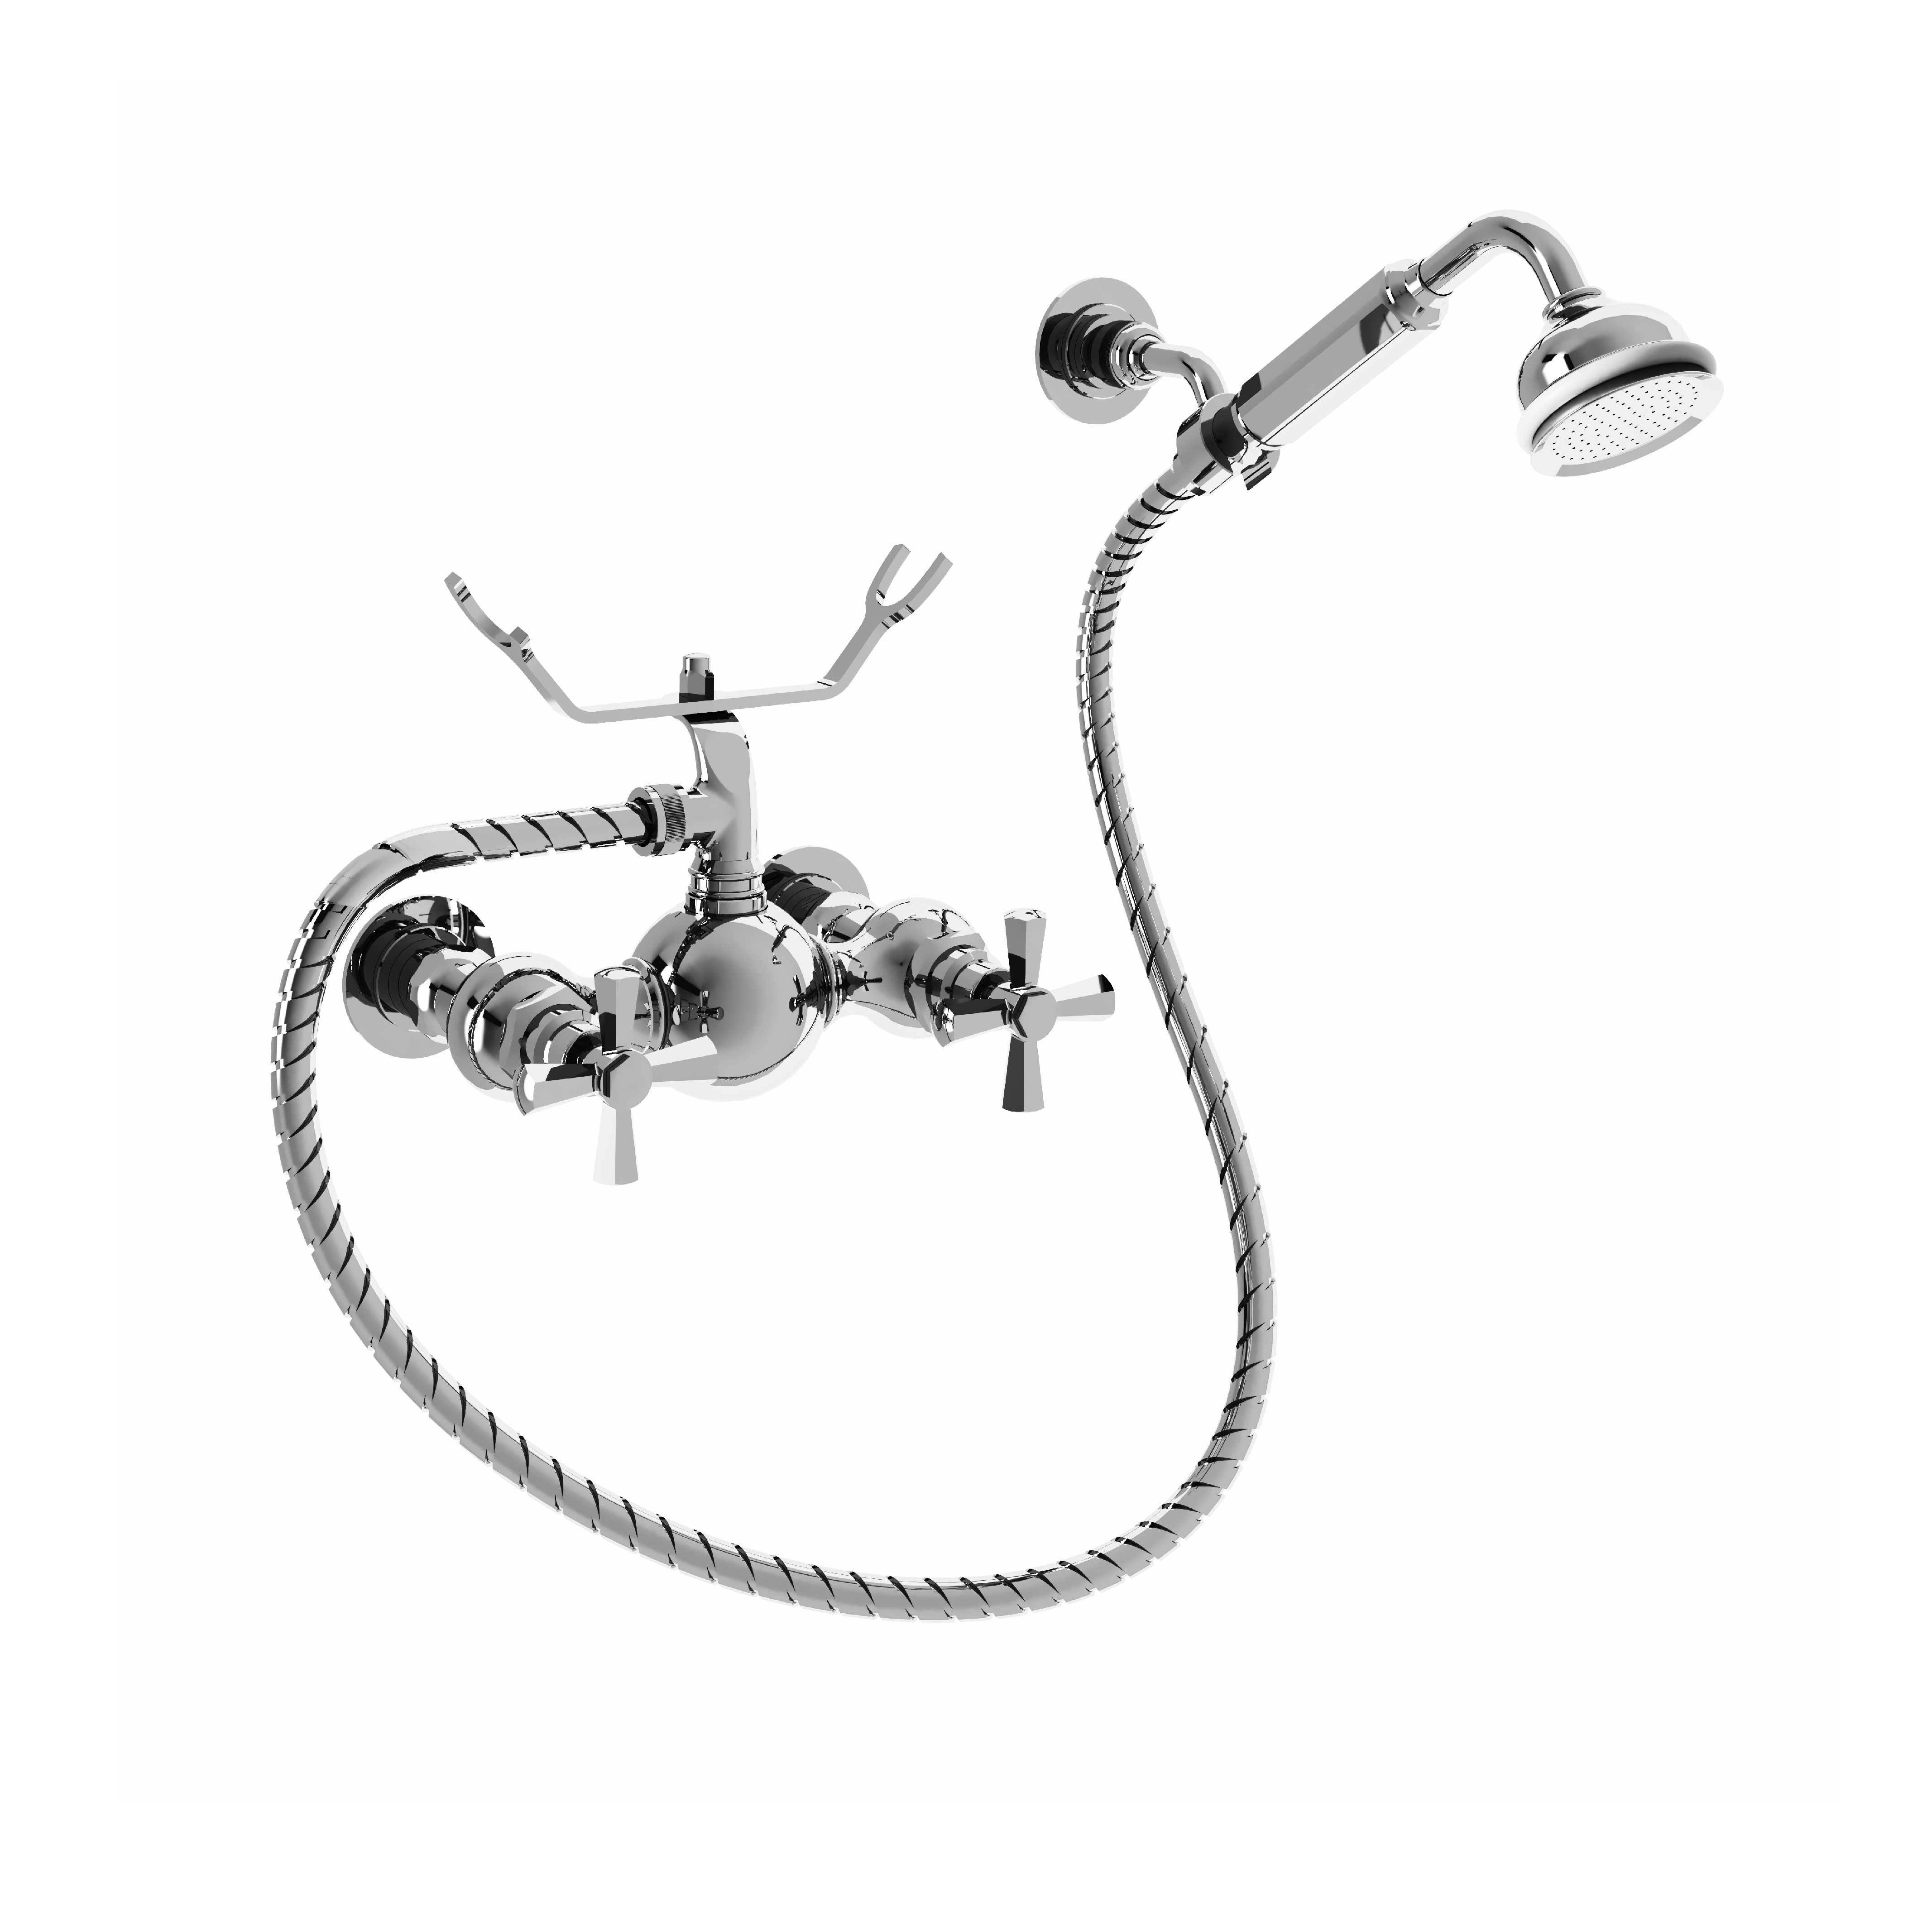 M38-2201 Shower mixer with hook